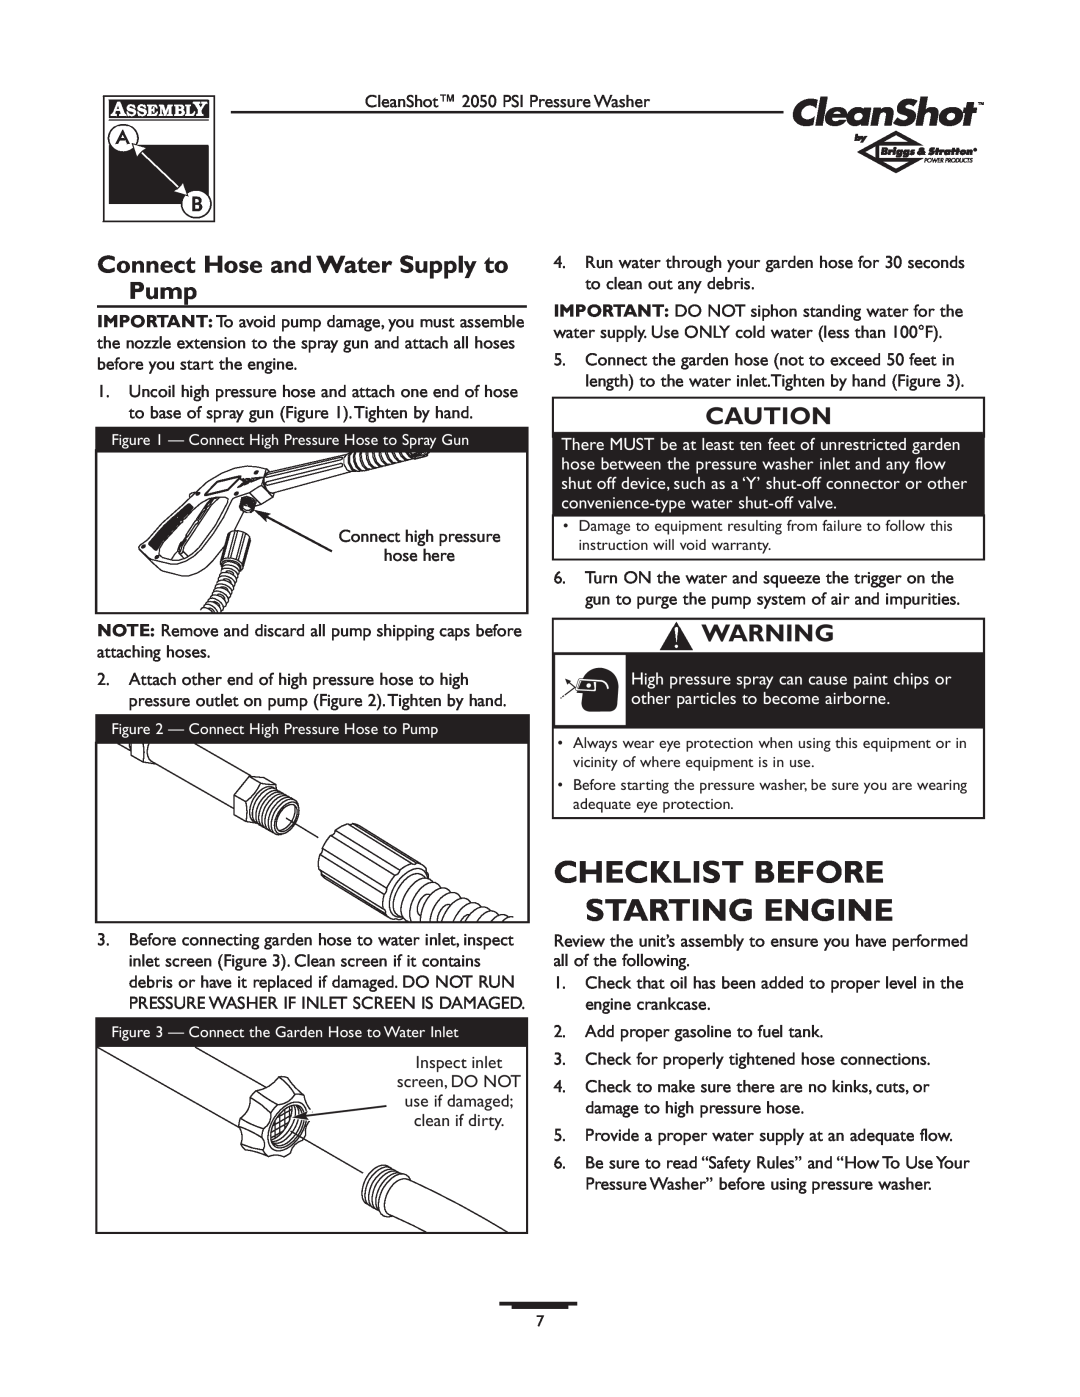 Briggs & Stratton 2050PSI owner manual Checklist Before Starting Engine, Connect Hose and Water Supply to Pump 